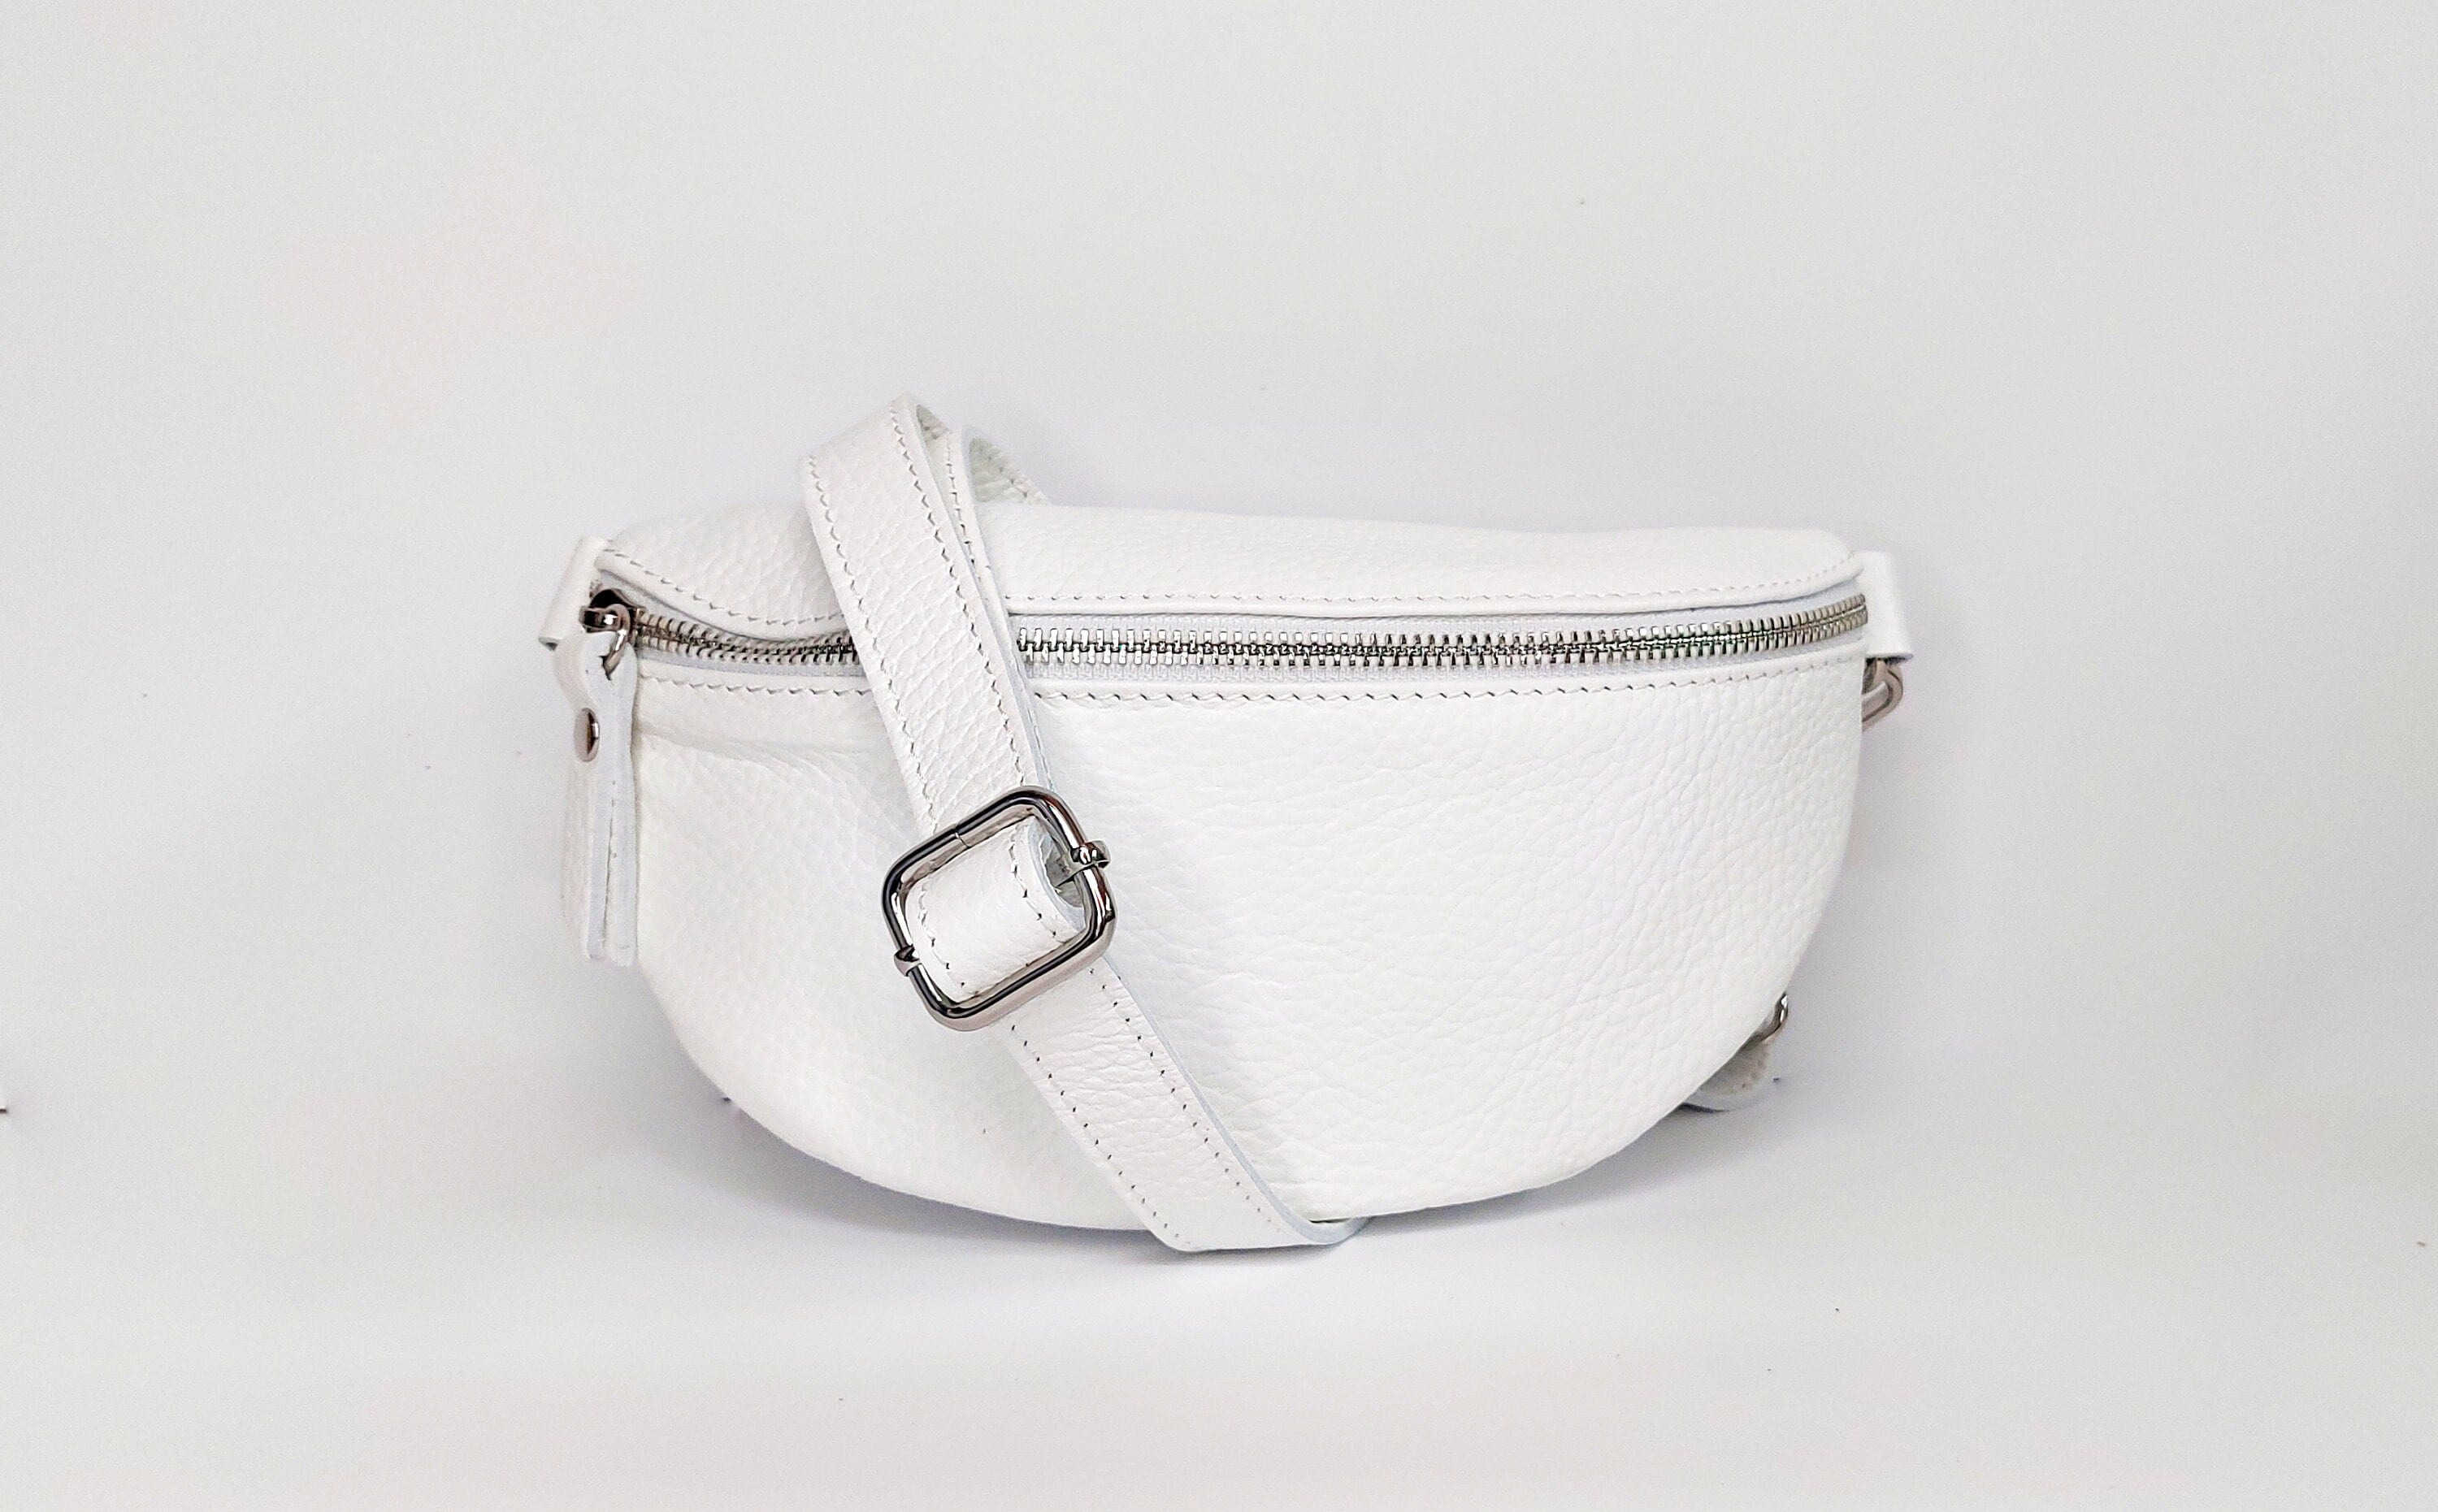 Belly bag in white real leather, nappa leather waist bag, bum bag in  natural leather, white leather cross body, travel bag